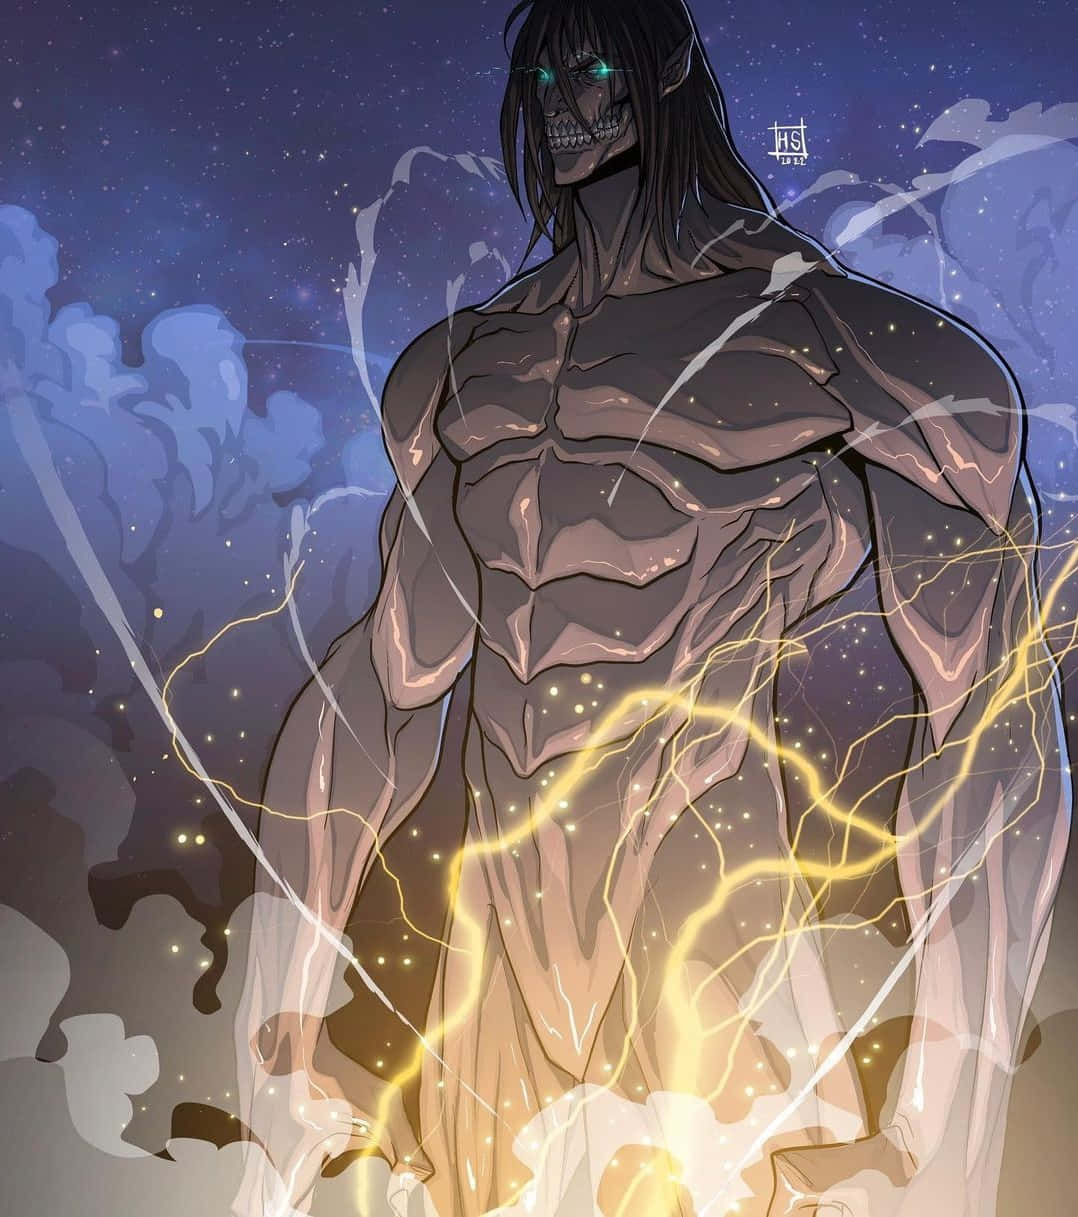 Look at the power of the Founding Titan Wallpaper